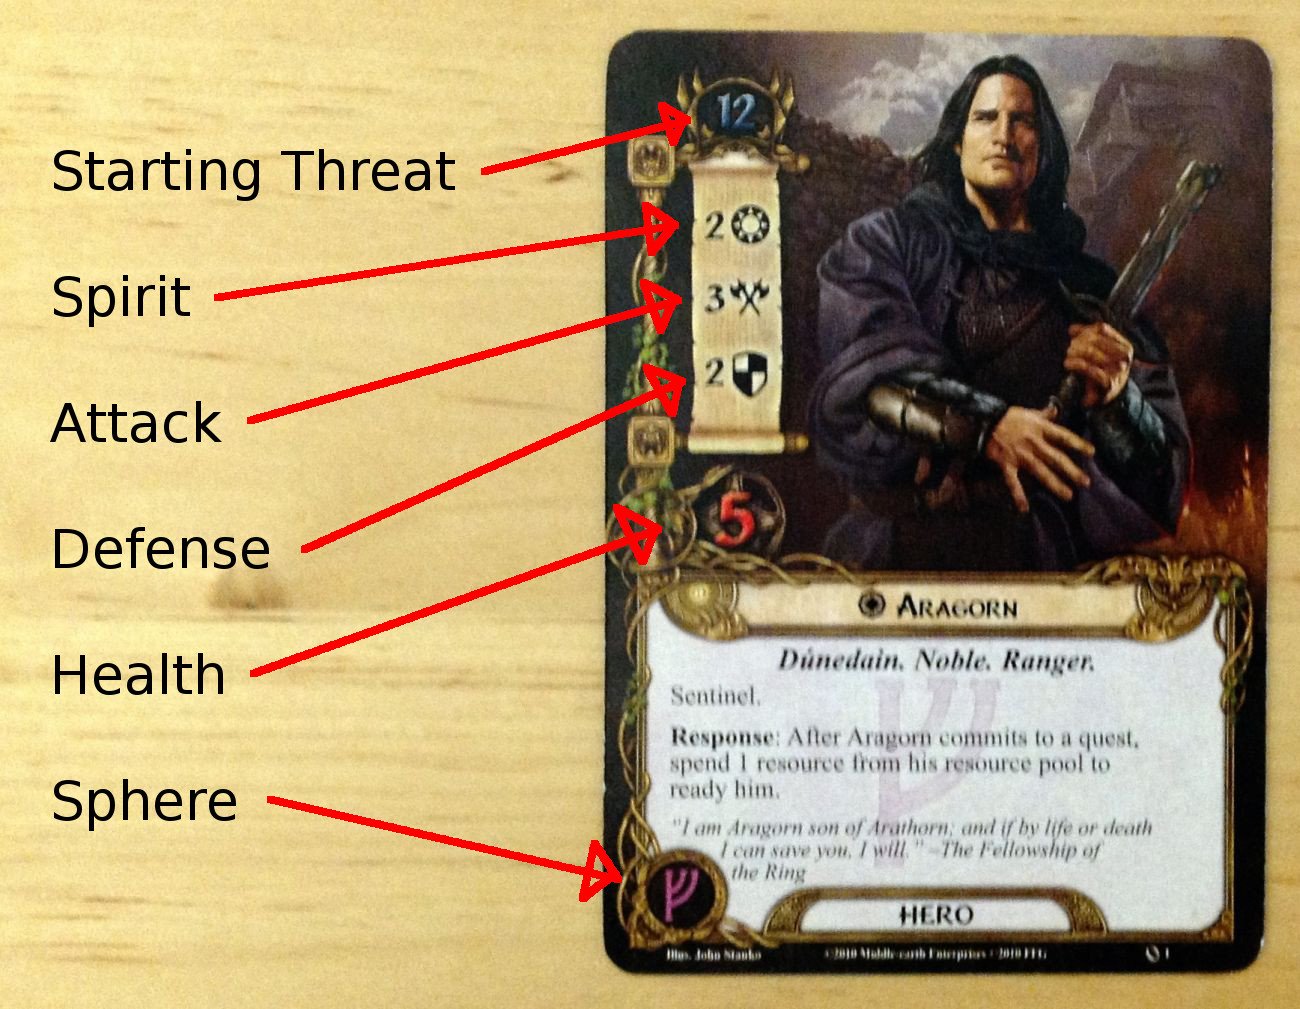 Aragorn Lord of the rings Card game